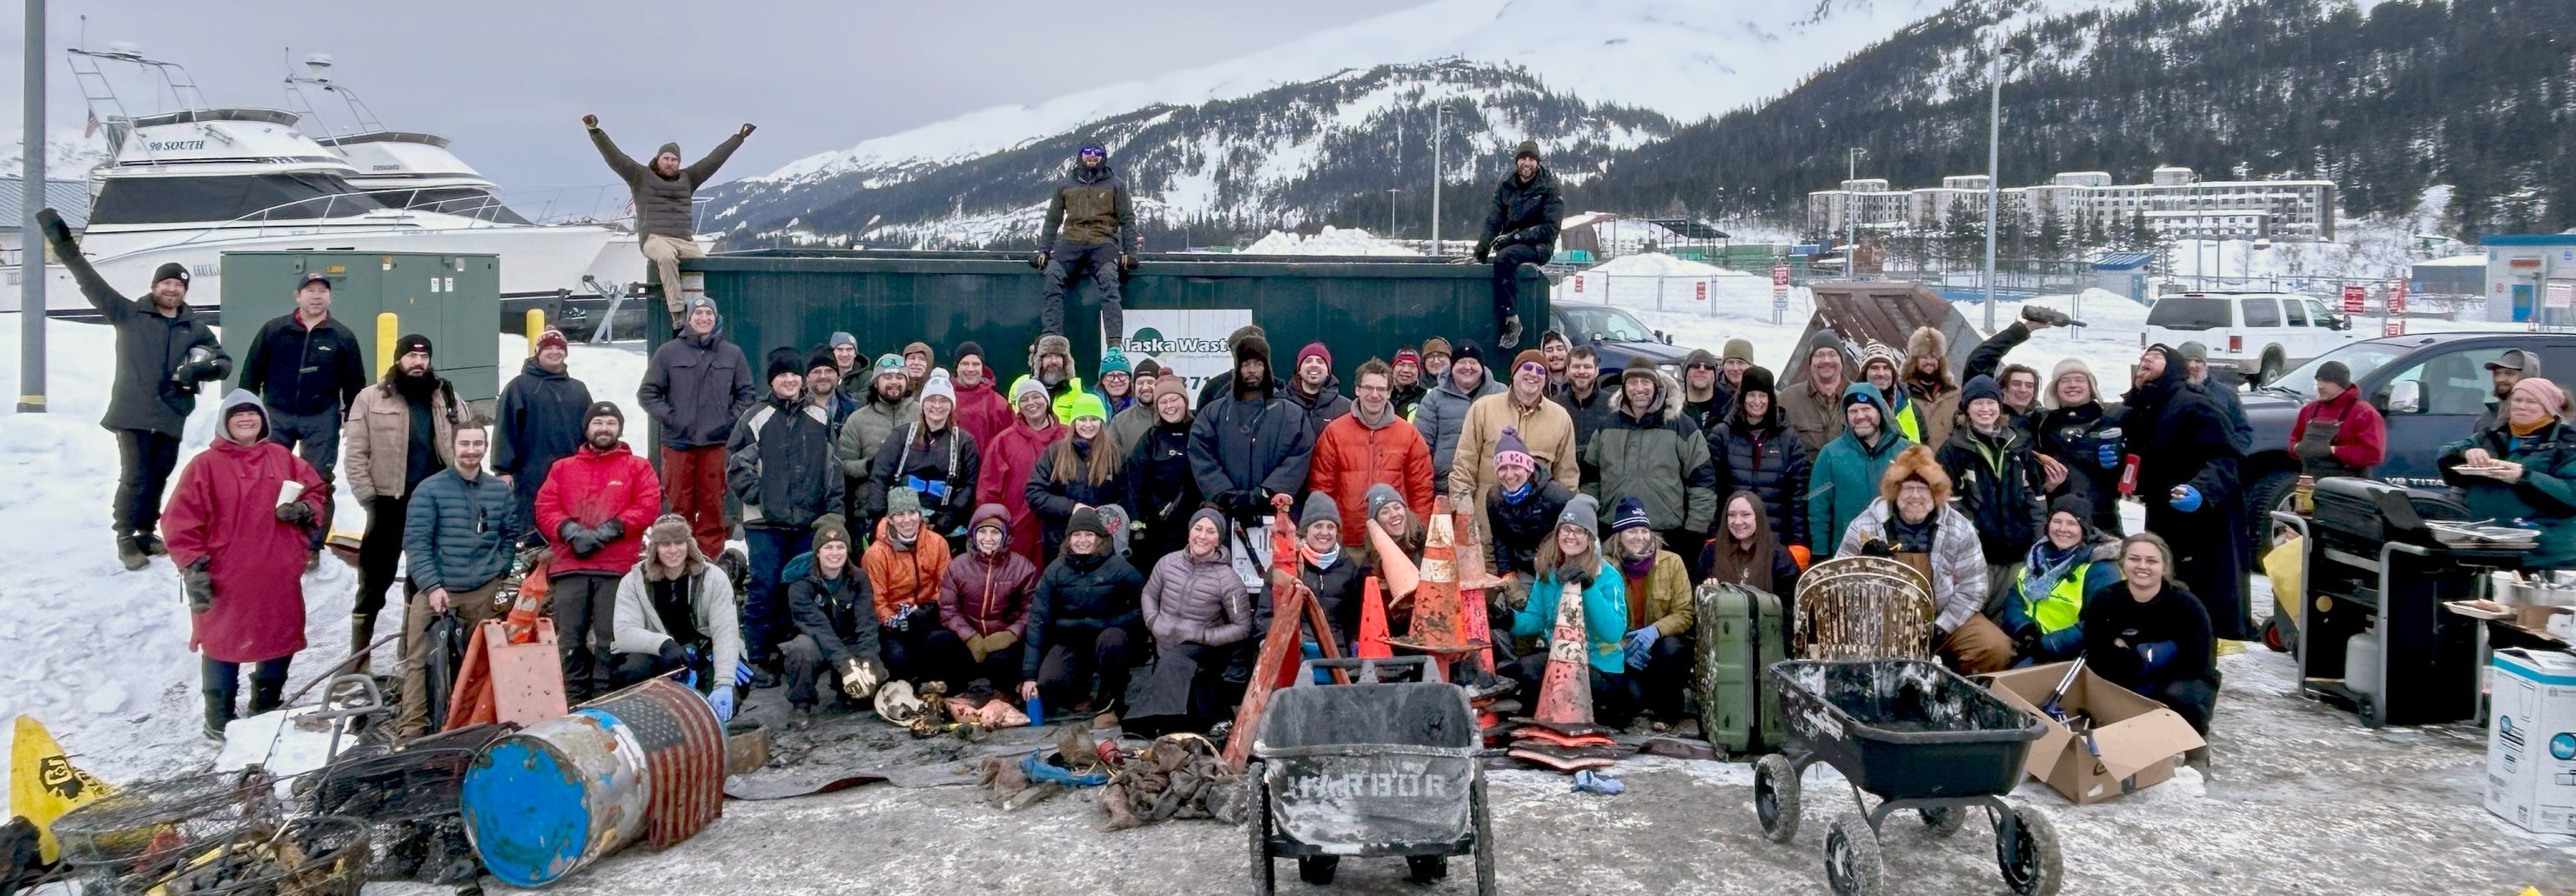 Dive Alaska volunteers bundled in warm clothes pose in a group photo with the objects they've retrieved from the water.